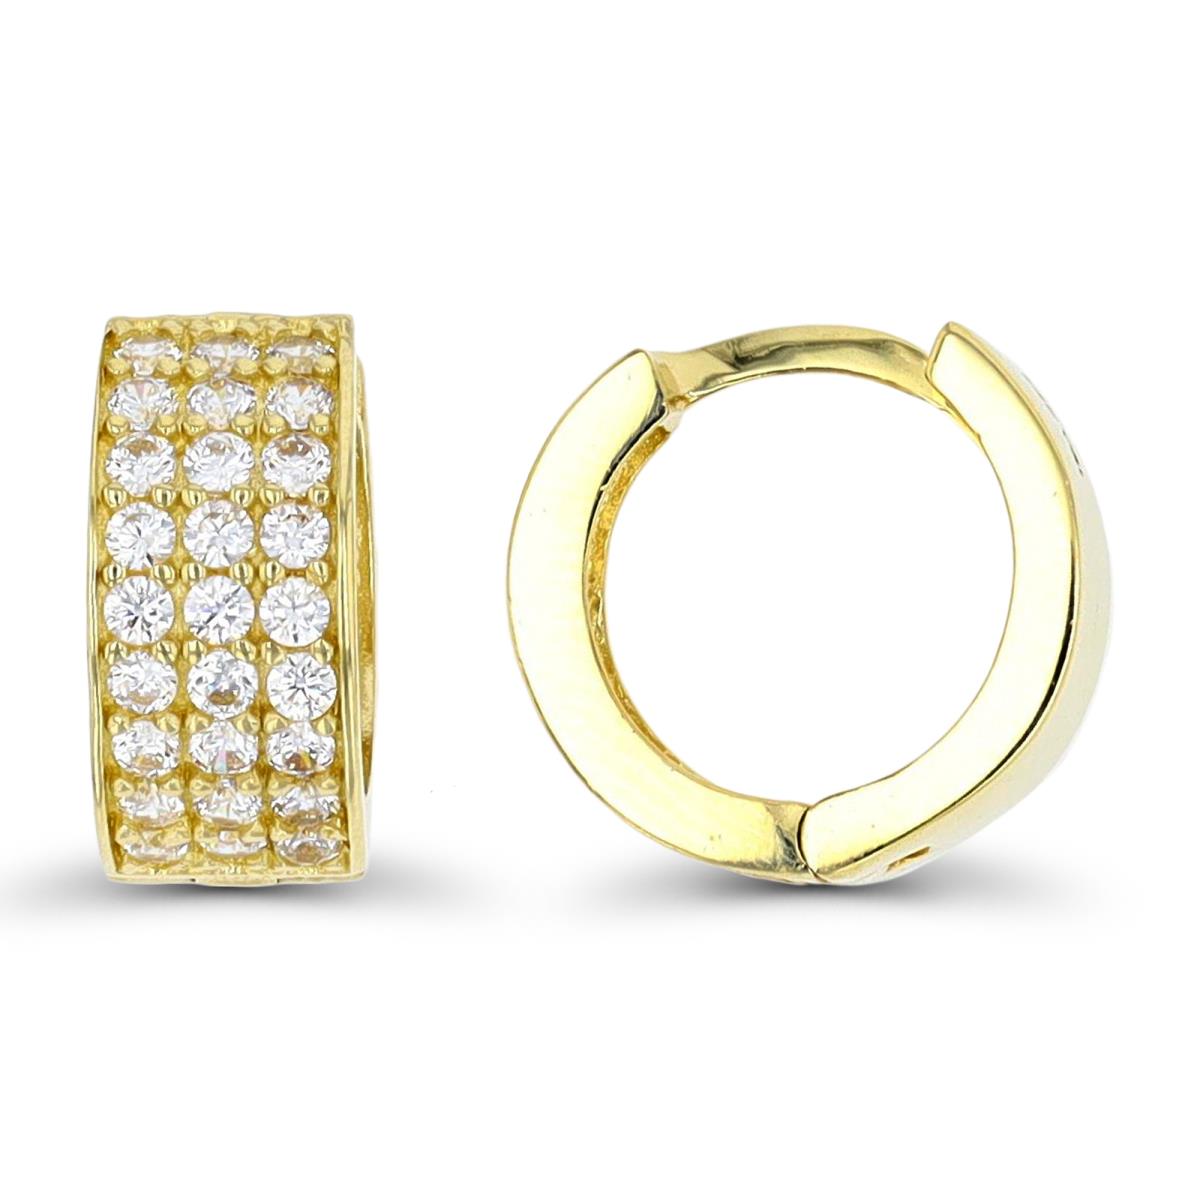 10K Yellow Gold 12x6mm Pave 3-Row Hoop Earring